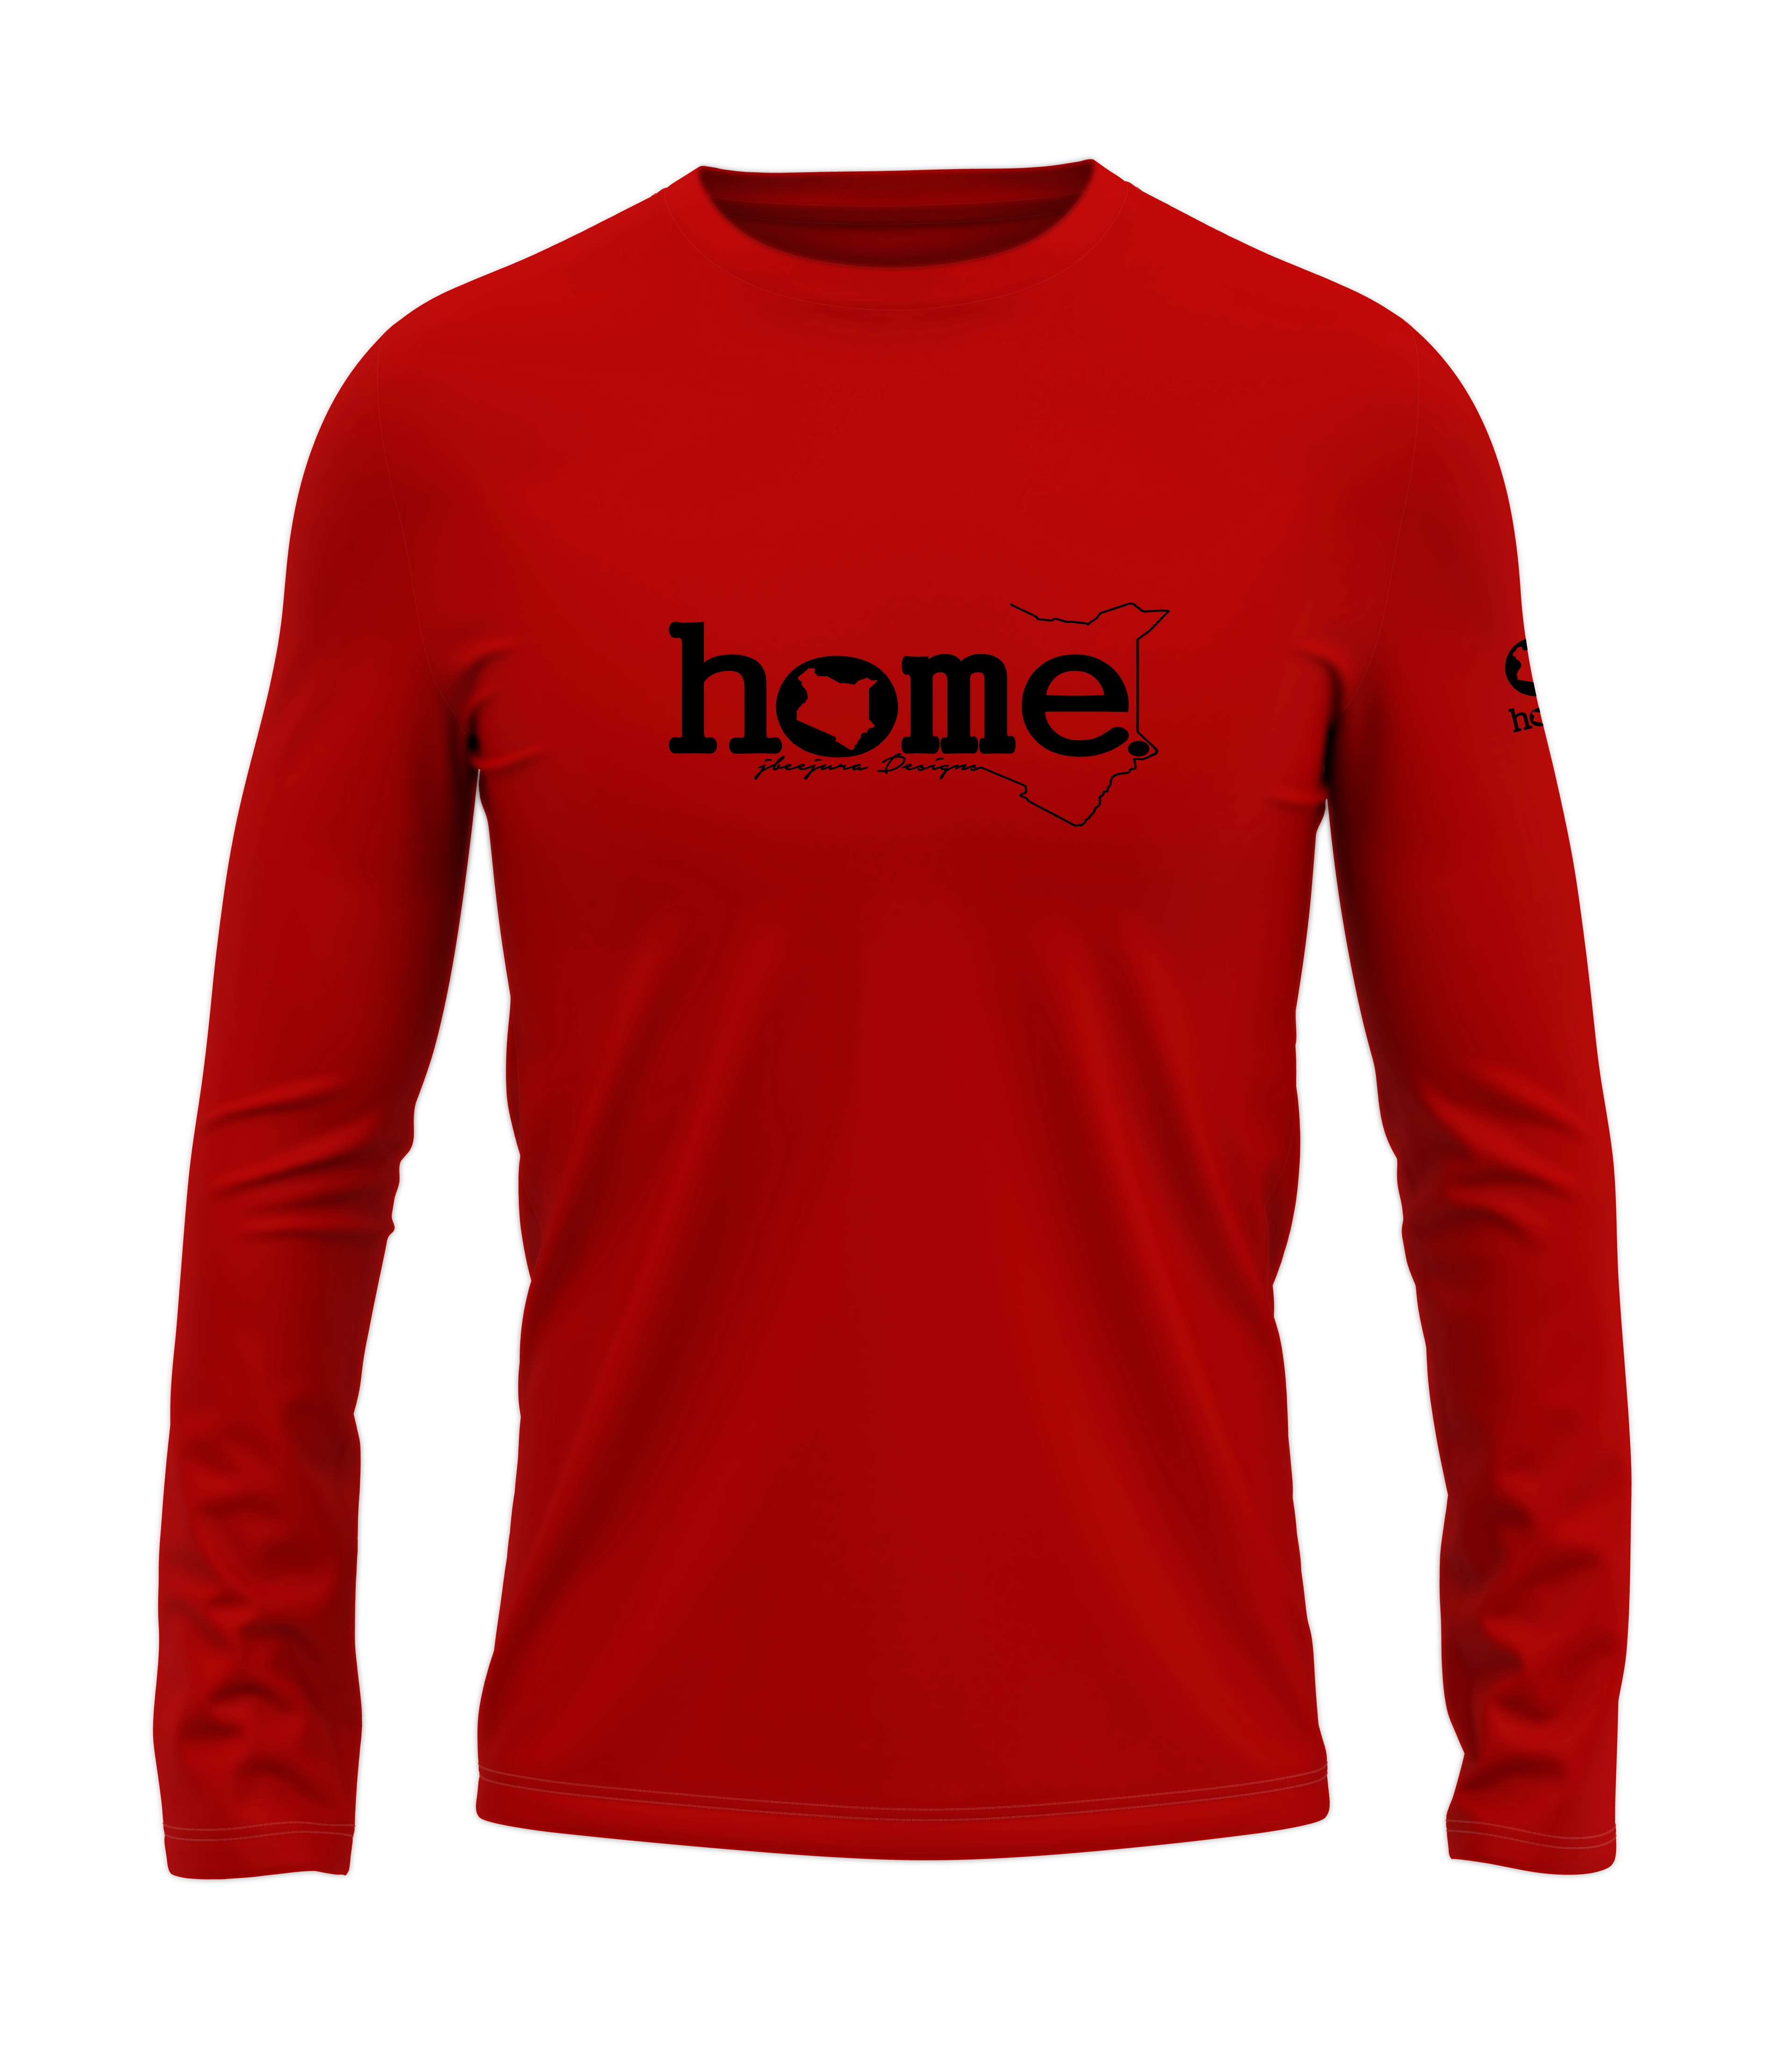 home_254 LONG-SLEEVED RED T-SHIRT WITH A BLACK CLASSIC WORDS PRINT – COTTON PLUS FABRIC